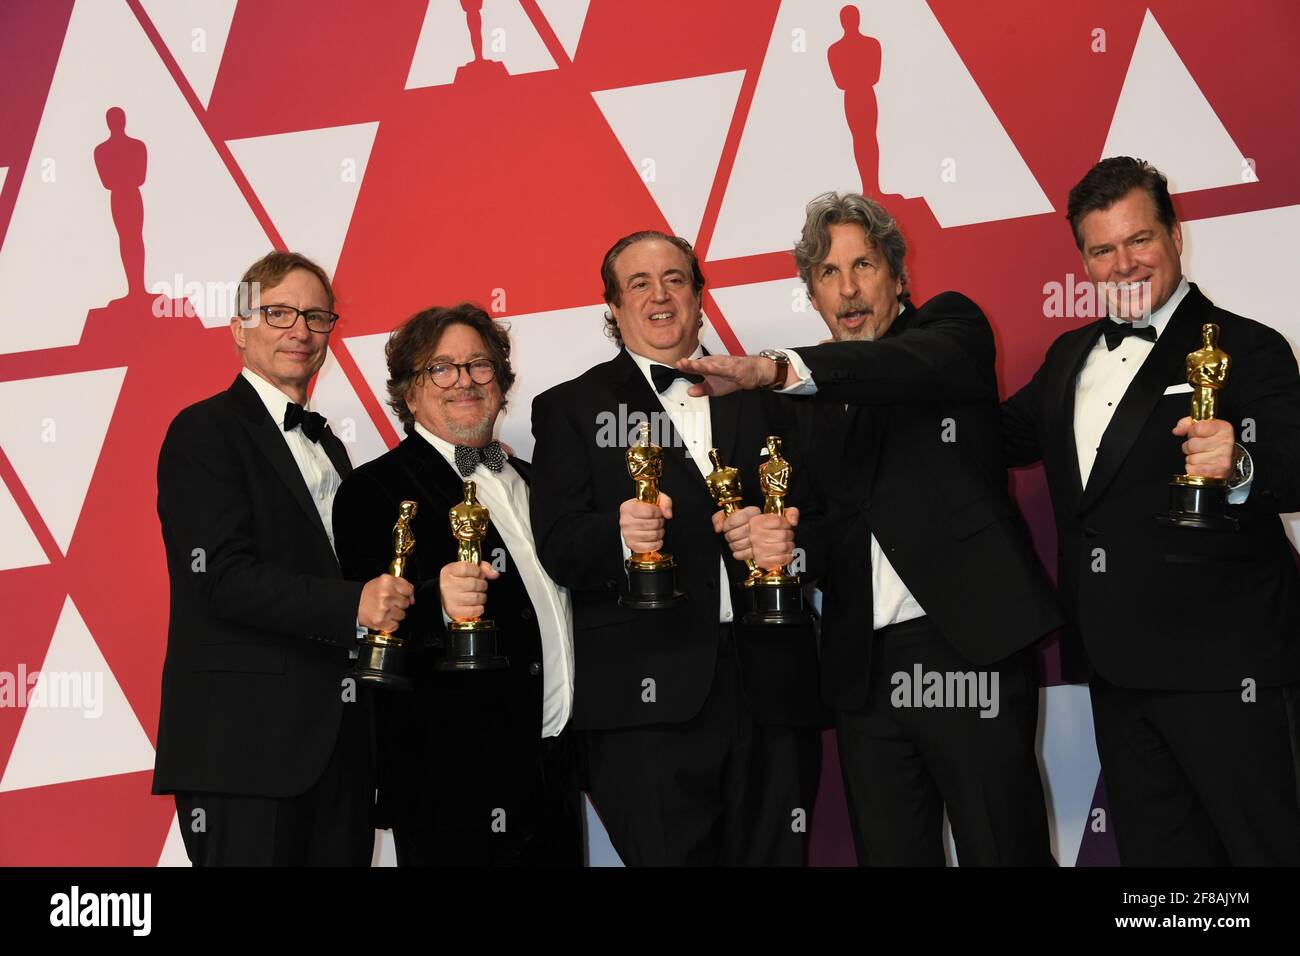 Winner Best Picture Green Book  Winner Best Picture Green Book Jim Burke Charles B. Wessler, Brian Currie, Peter Farrelly, Nick Vallelonga in the Press Room during the 91st Annual Academy Awards, Oscars, held at the Dolby Theater in Hollywood, California, Sunday, February 24, 2019 Photo by Jennifer Graylock-Graylock.com 917-519-7666 Stock Photo